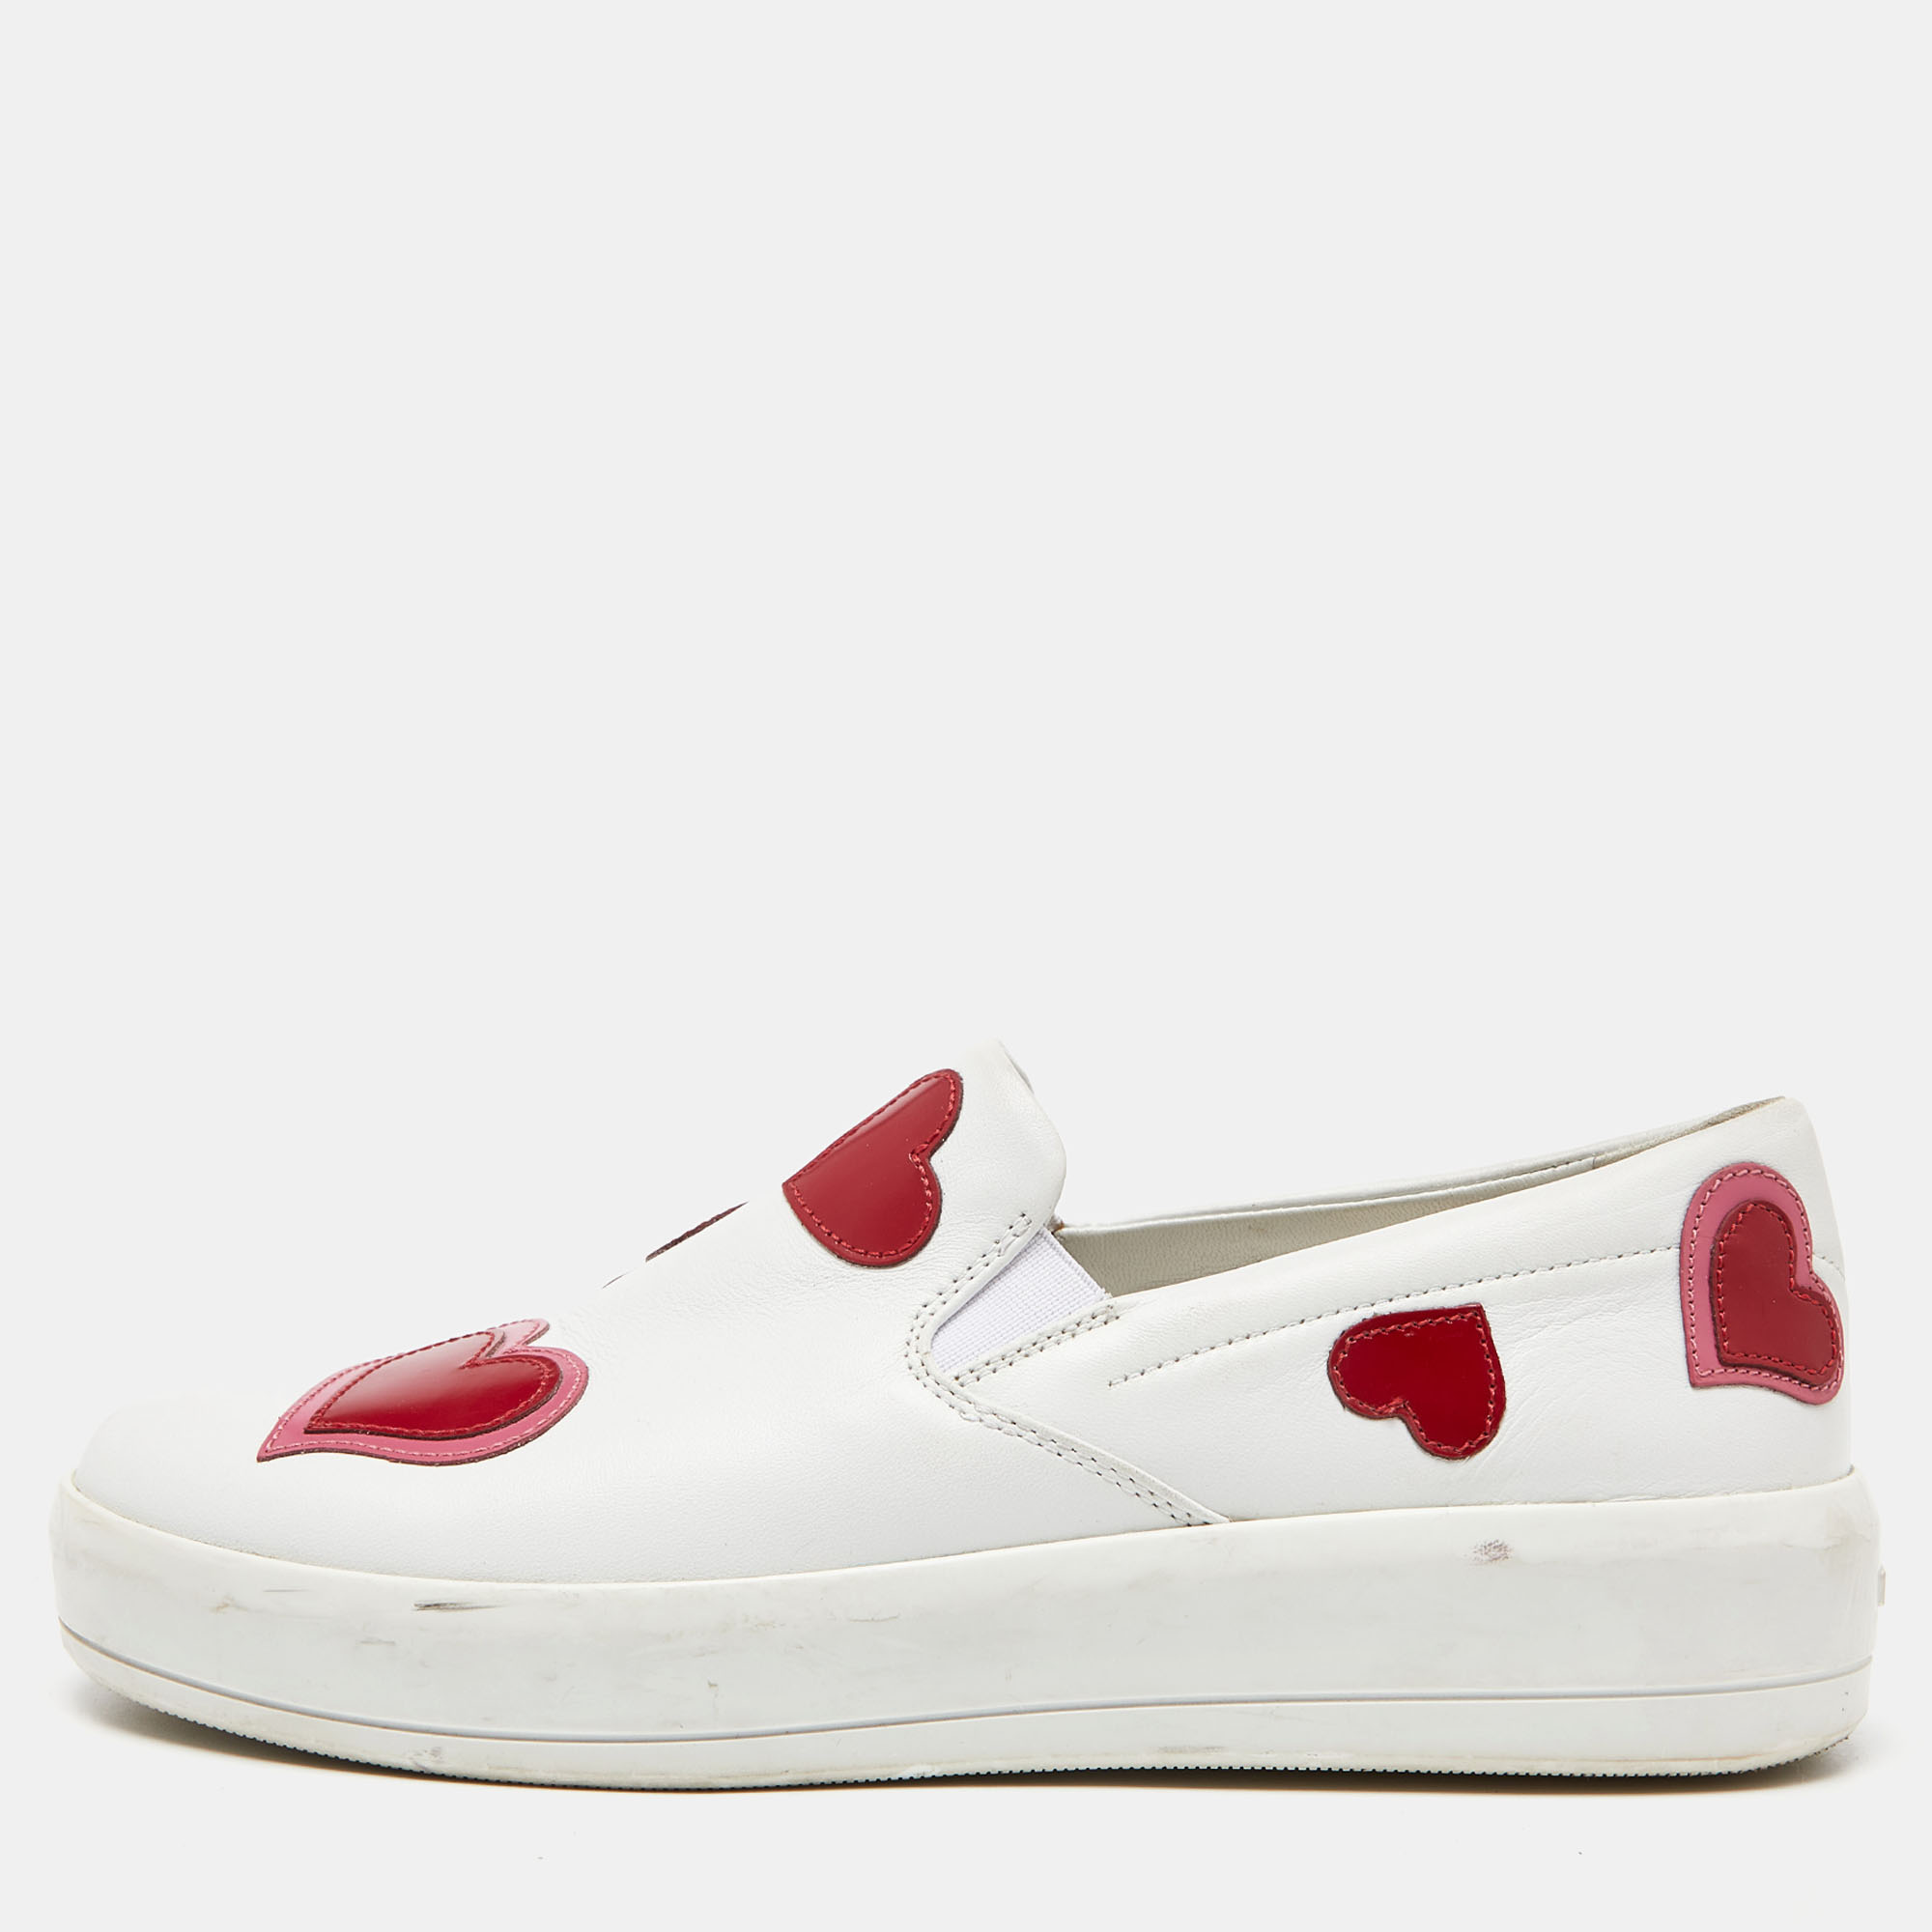 Pre-owned Prada White Leather Heart Slip On Sneakers Size 36.5